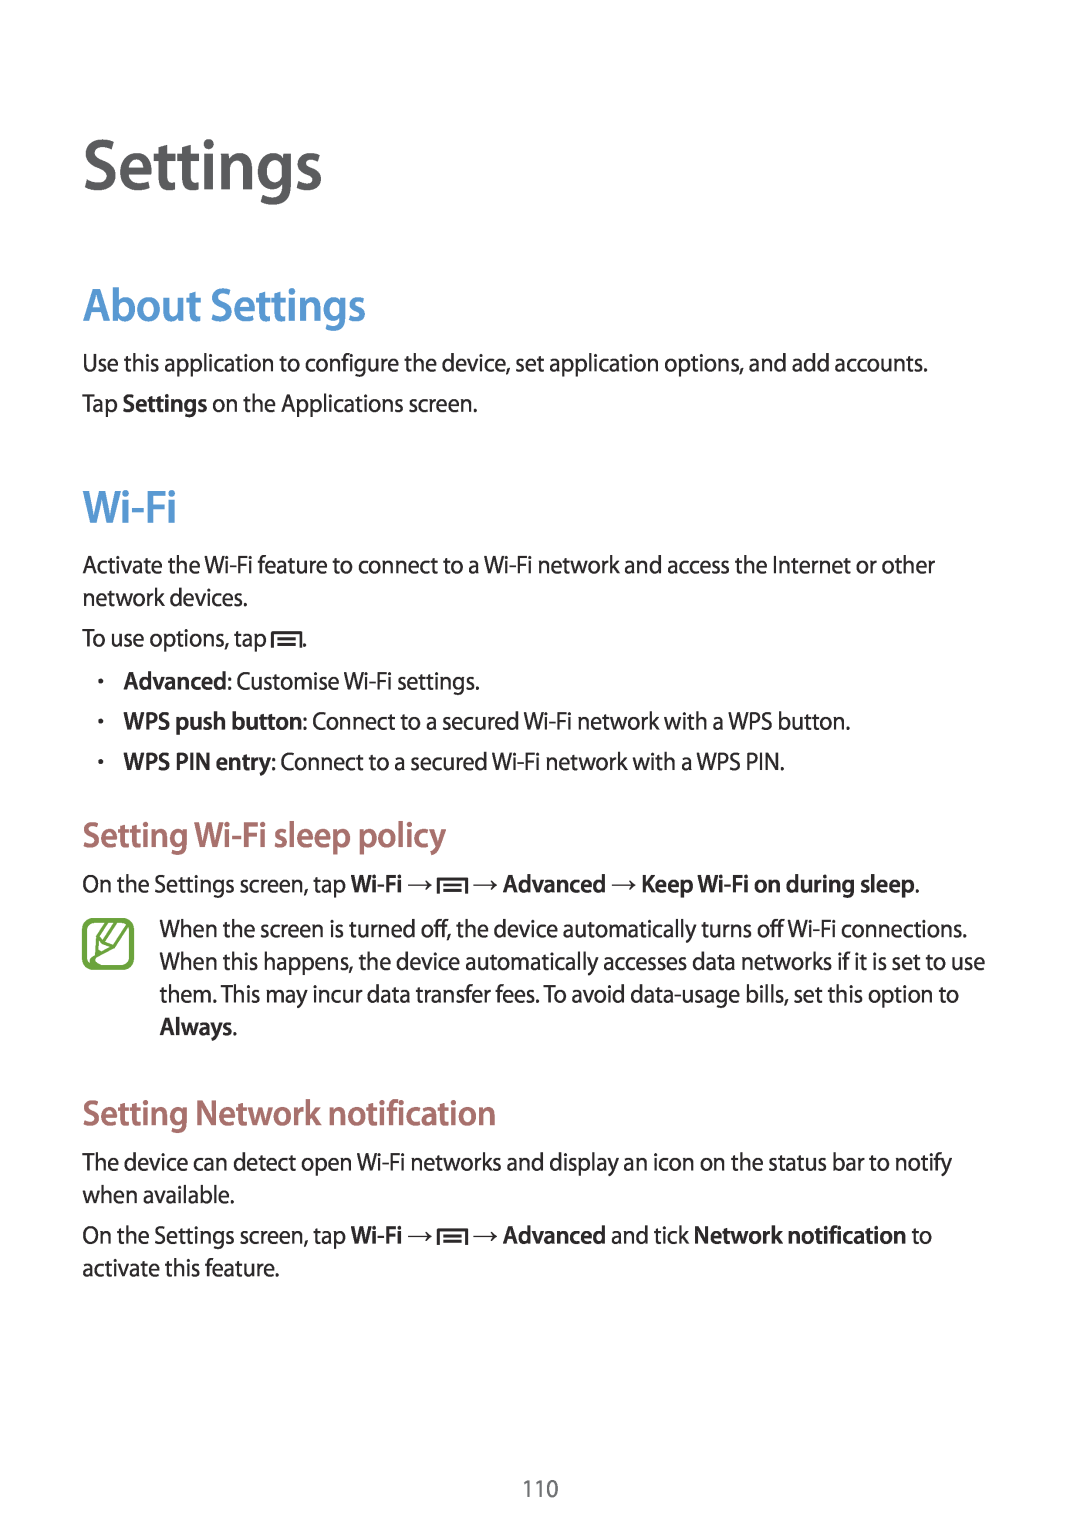 Samsung GT-N5100 user manual About Settings, Setting Wi-Fi sleep policy, Setting Network notification 